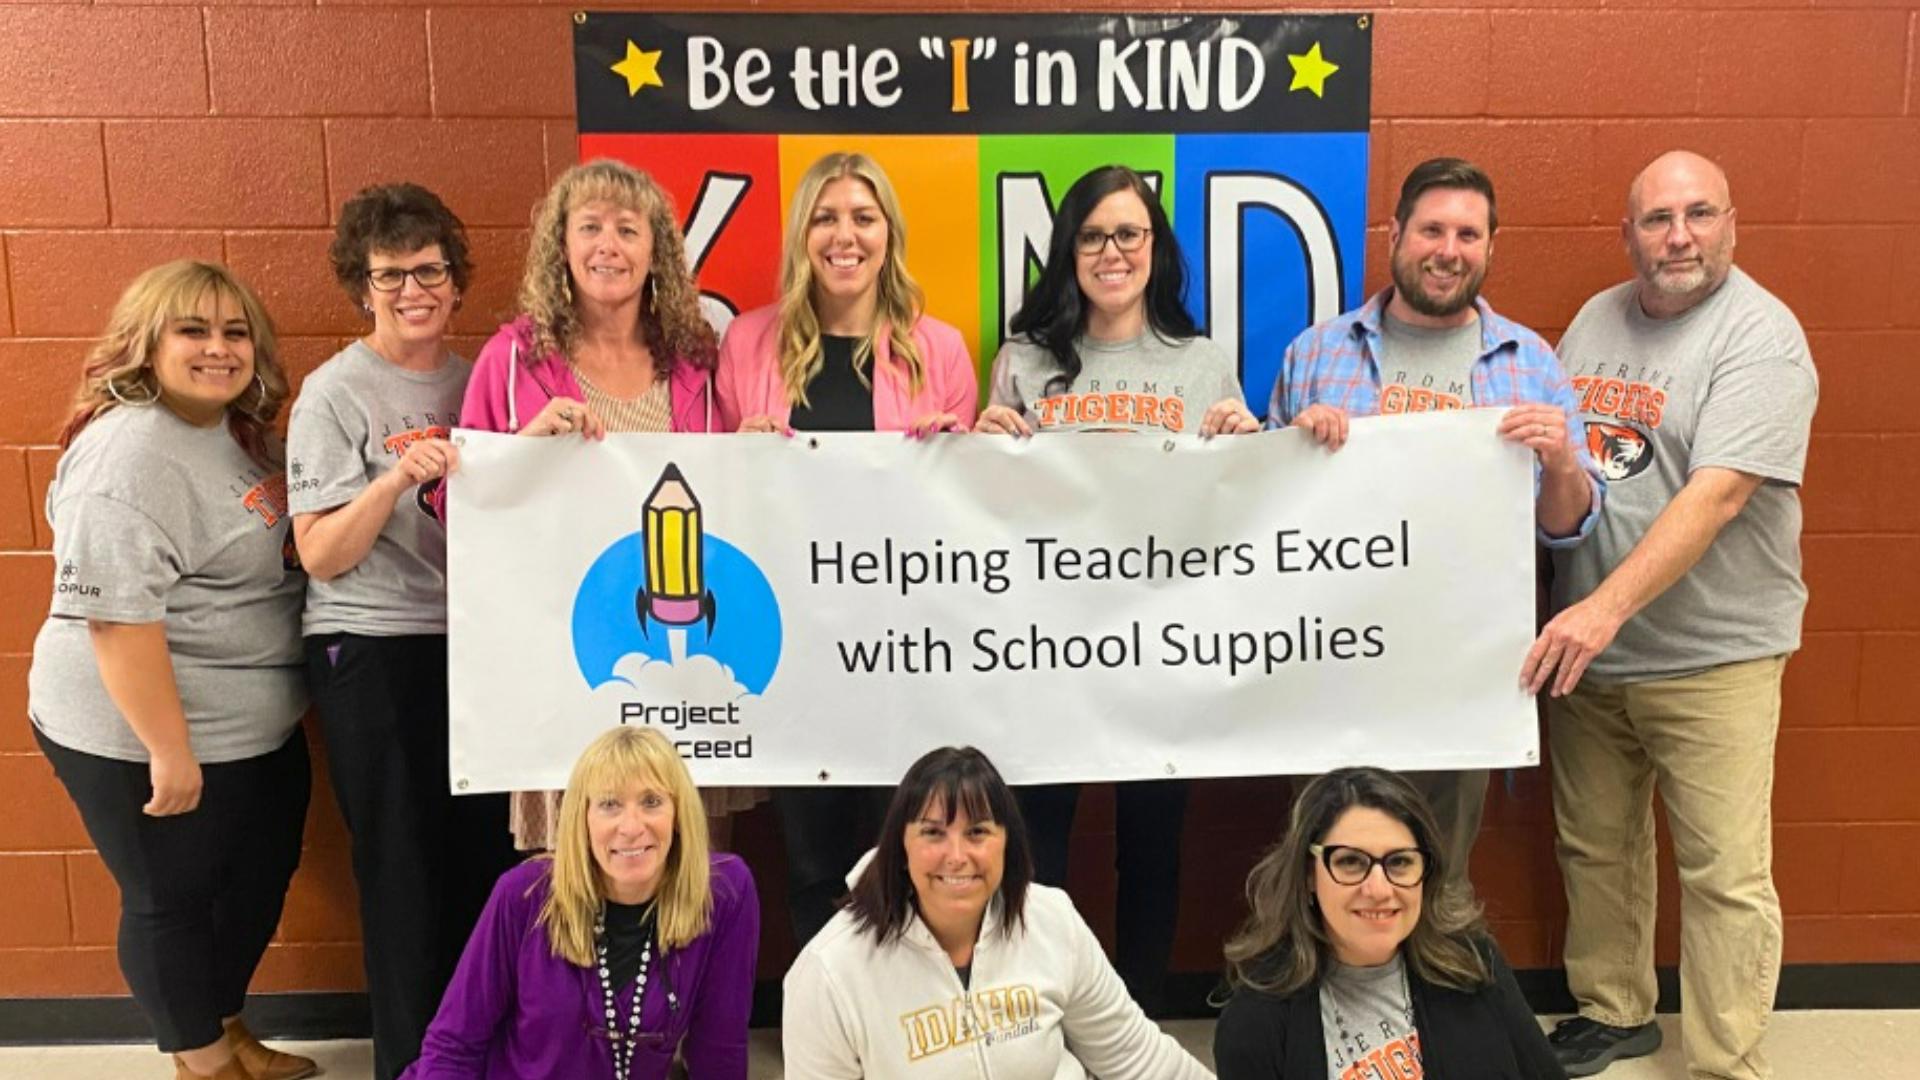 Project Succeed supports teachers in the Magic Valley by providing school supplies. Idaho Gives has raised more than $3.2 million this year for Gem State nonprofits.